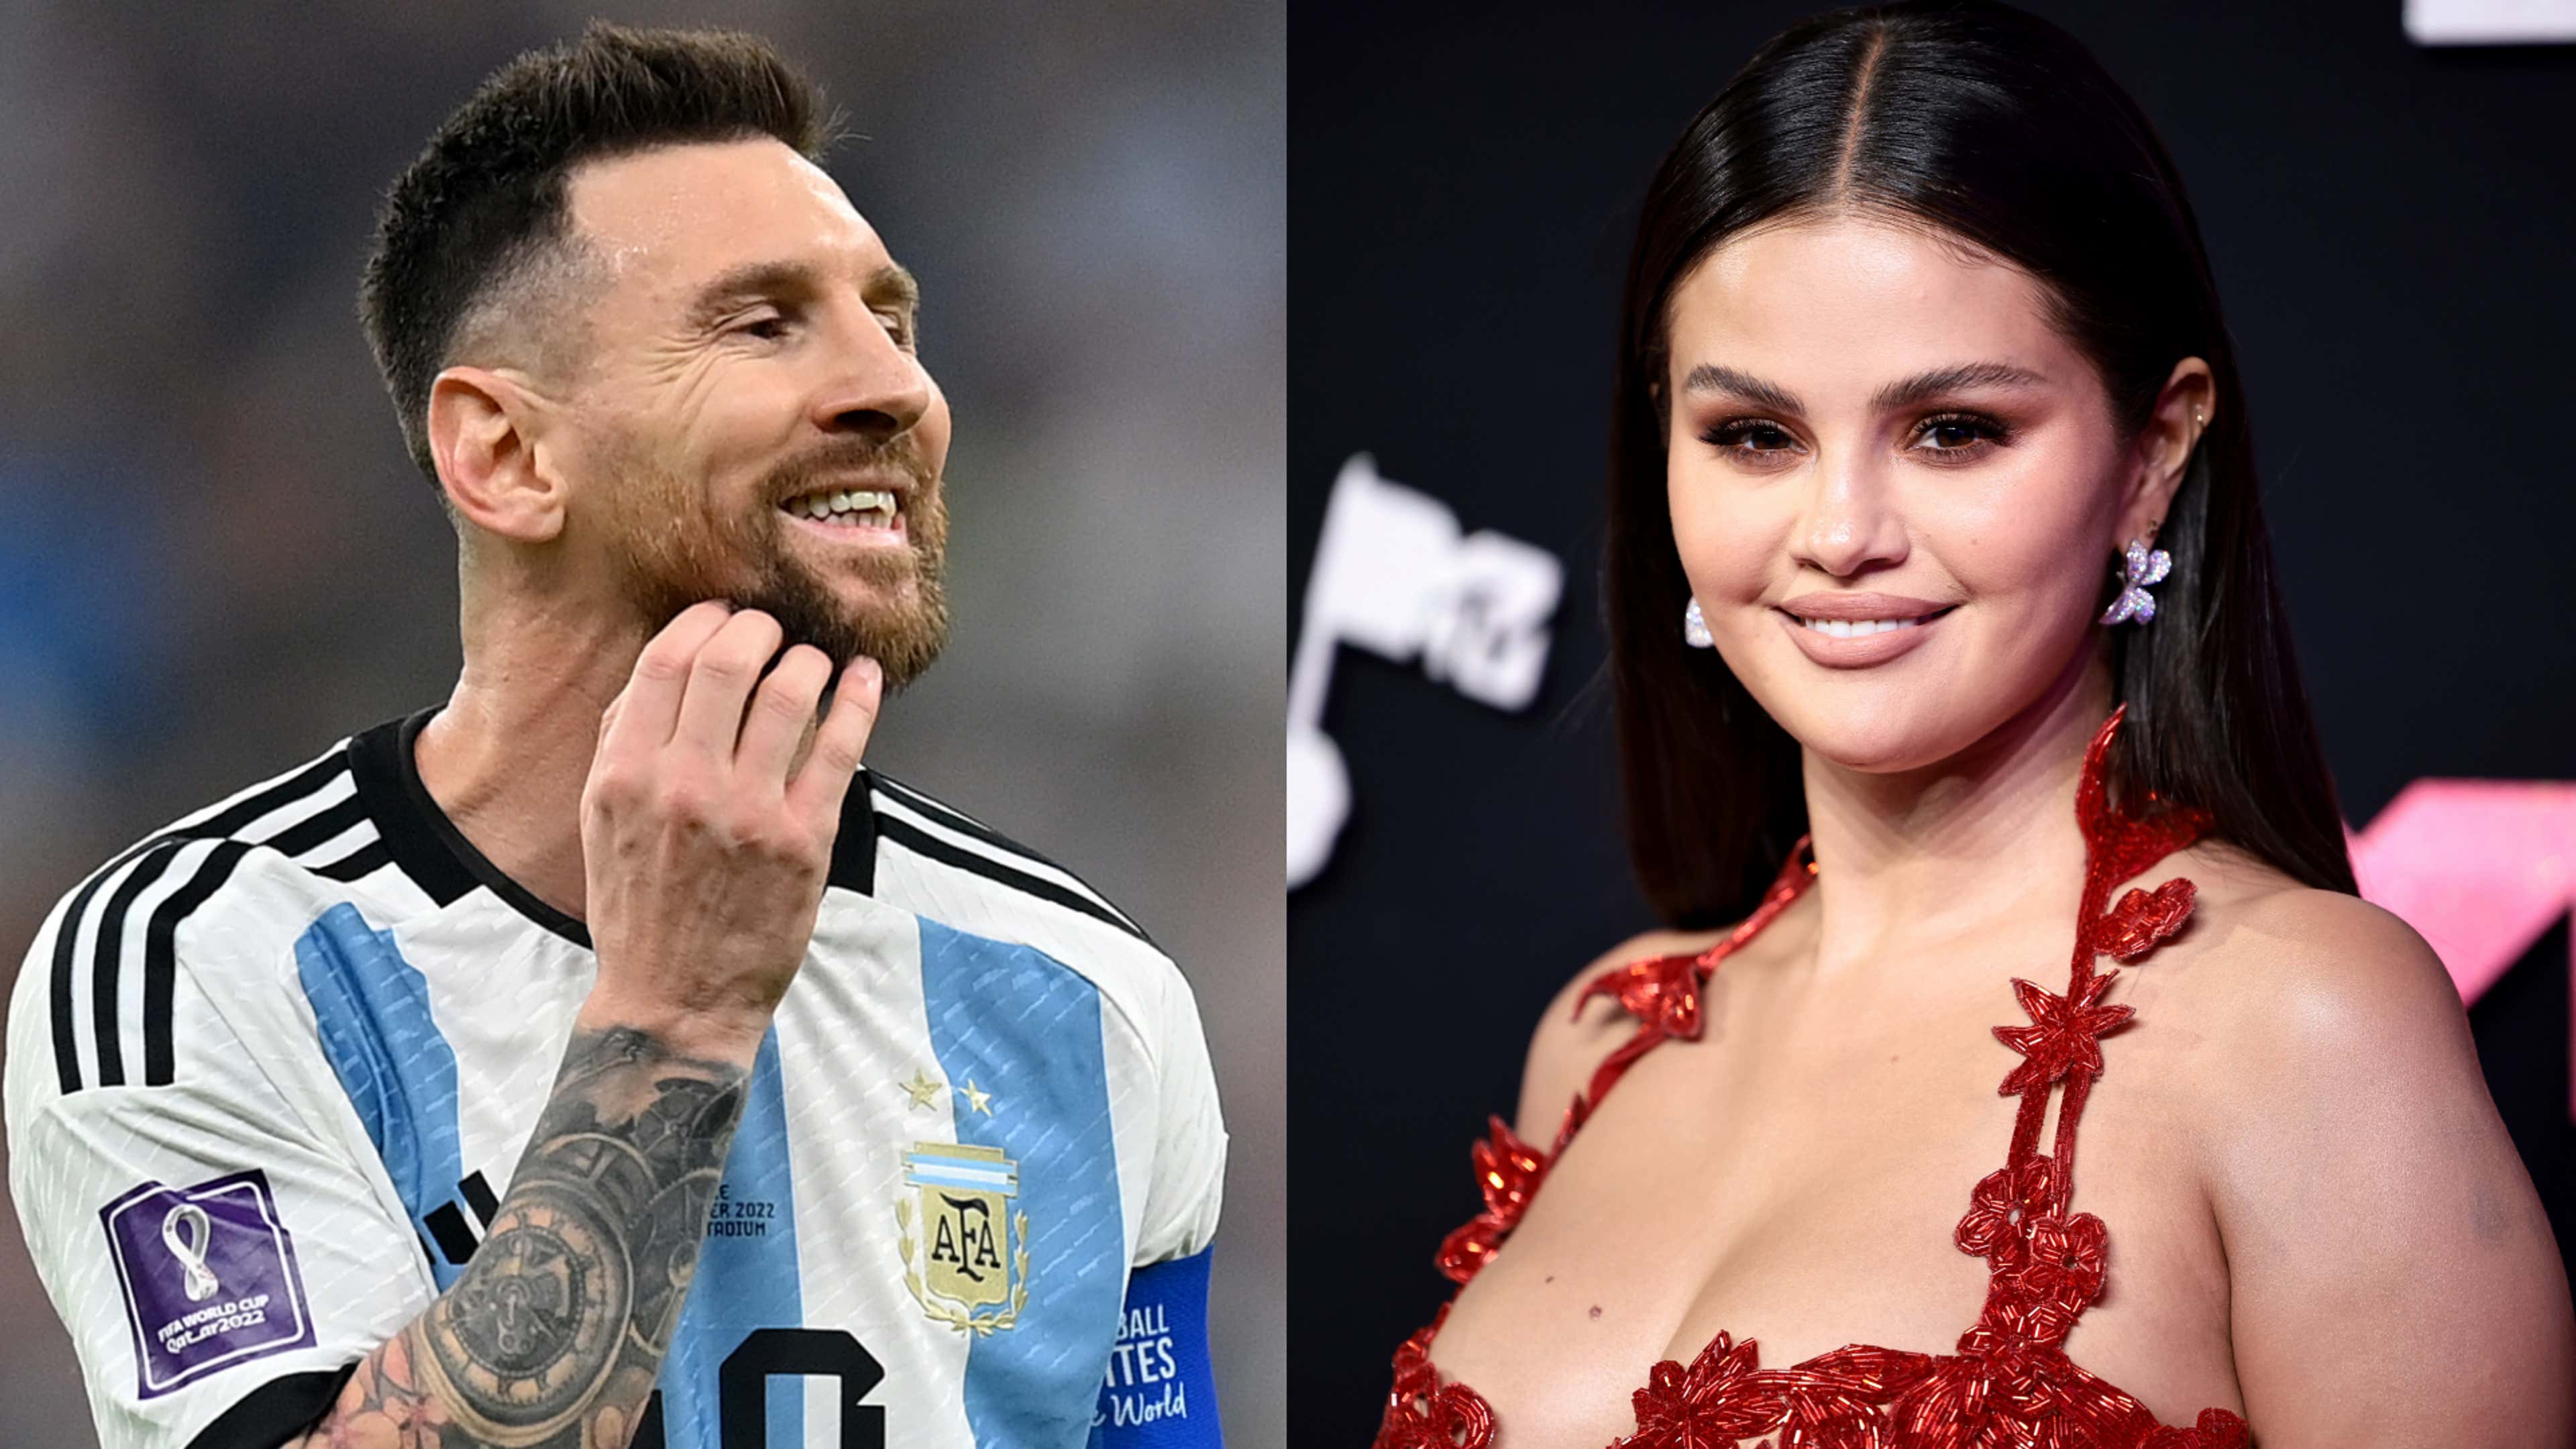 son.Selena Gomez will auction off her “priceless” Lionel Messi shirt for charity as the auction price of her signed Argentina shirt exceeded $6,000.